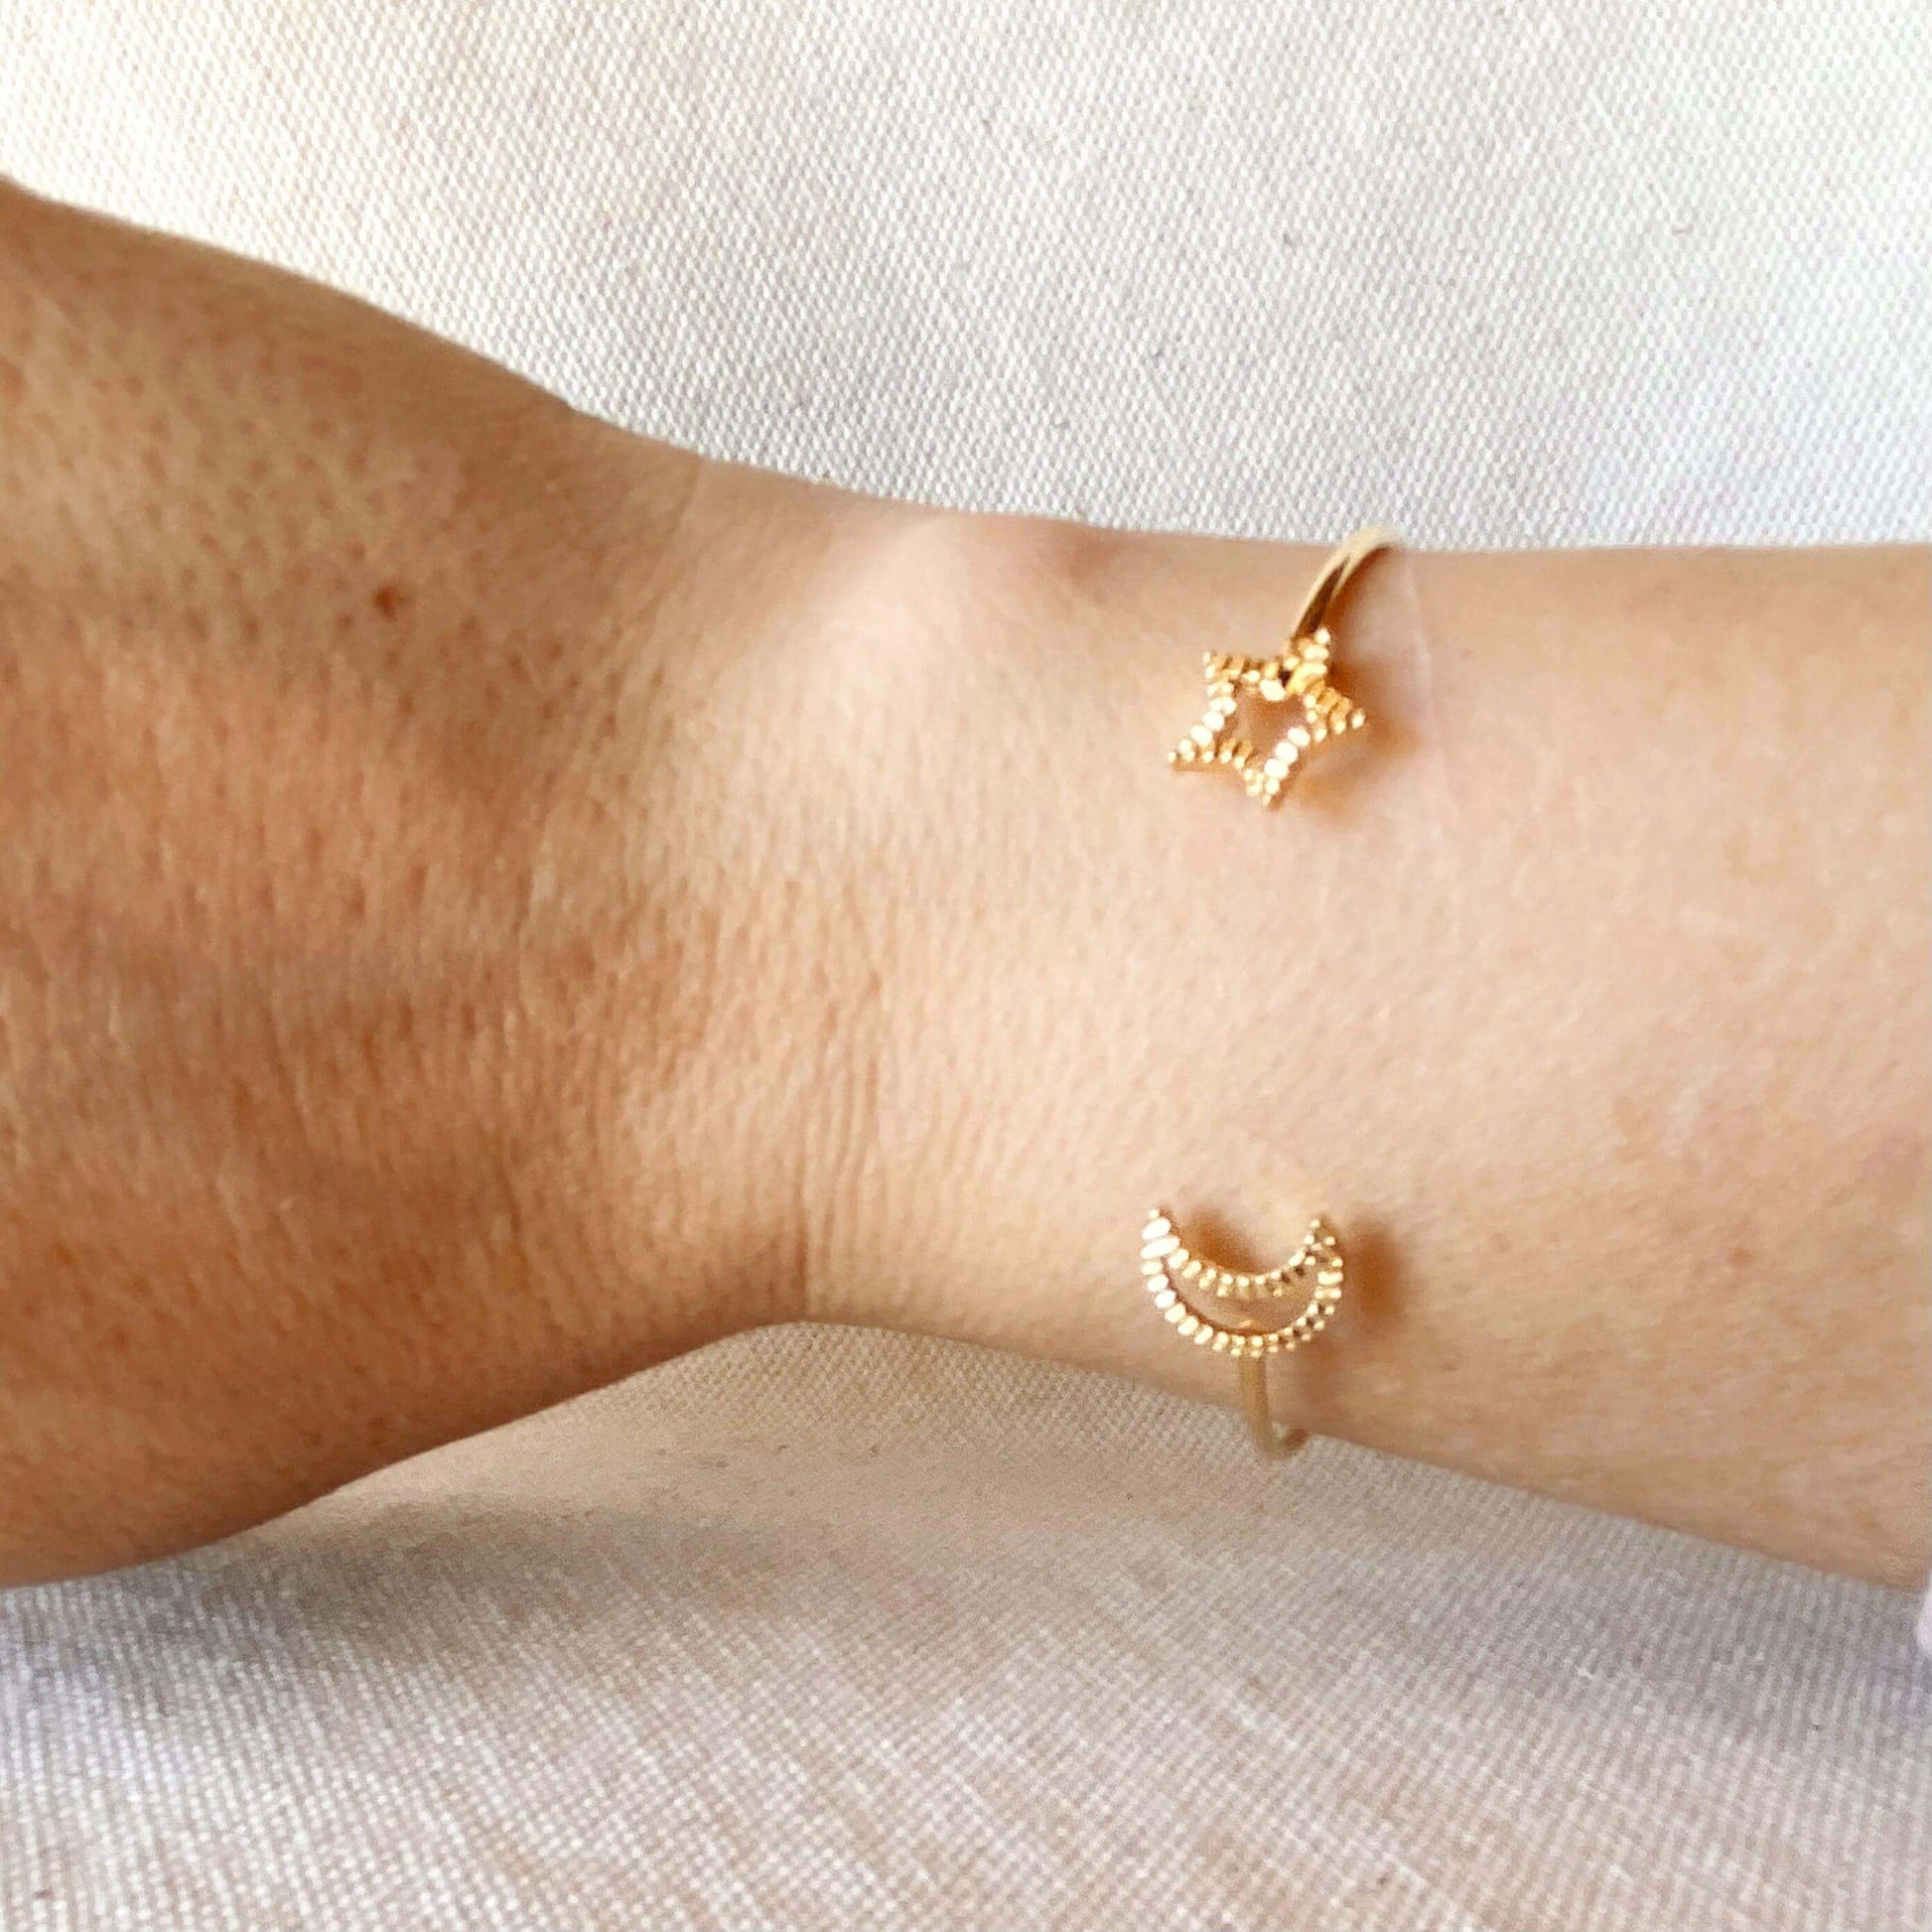 GoldFi 18k Gold Filled Moon and Star Cuff Bracelet